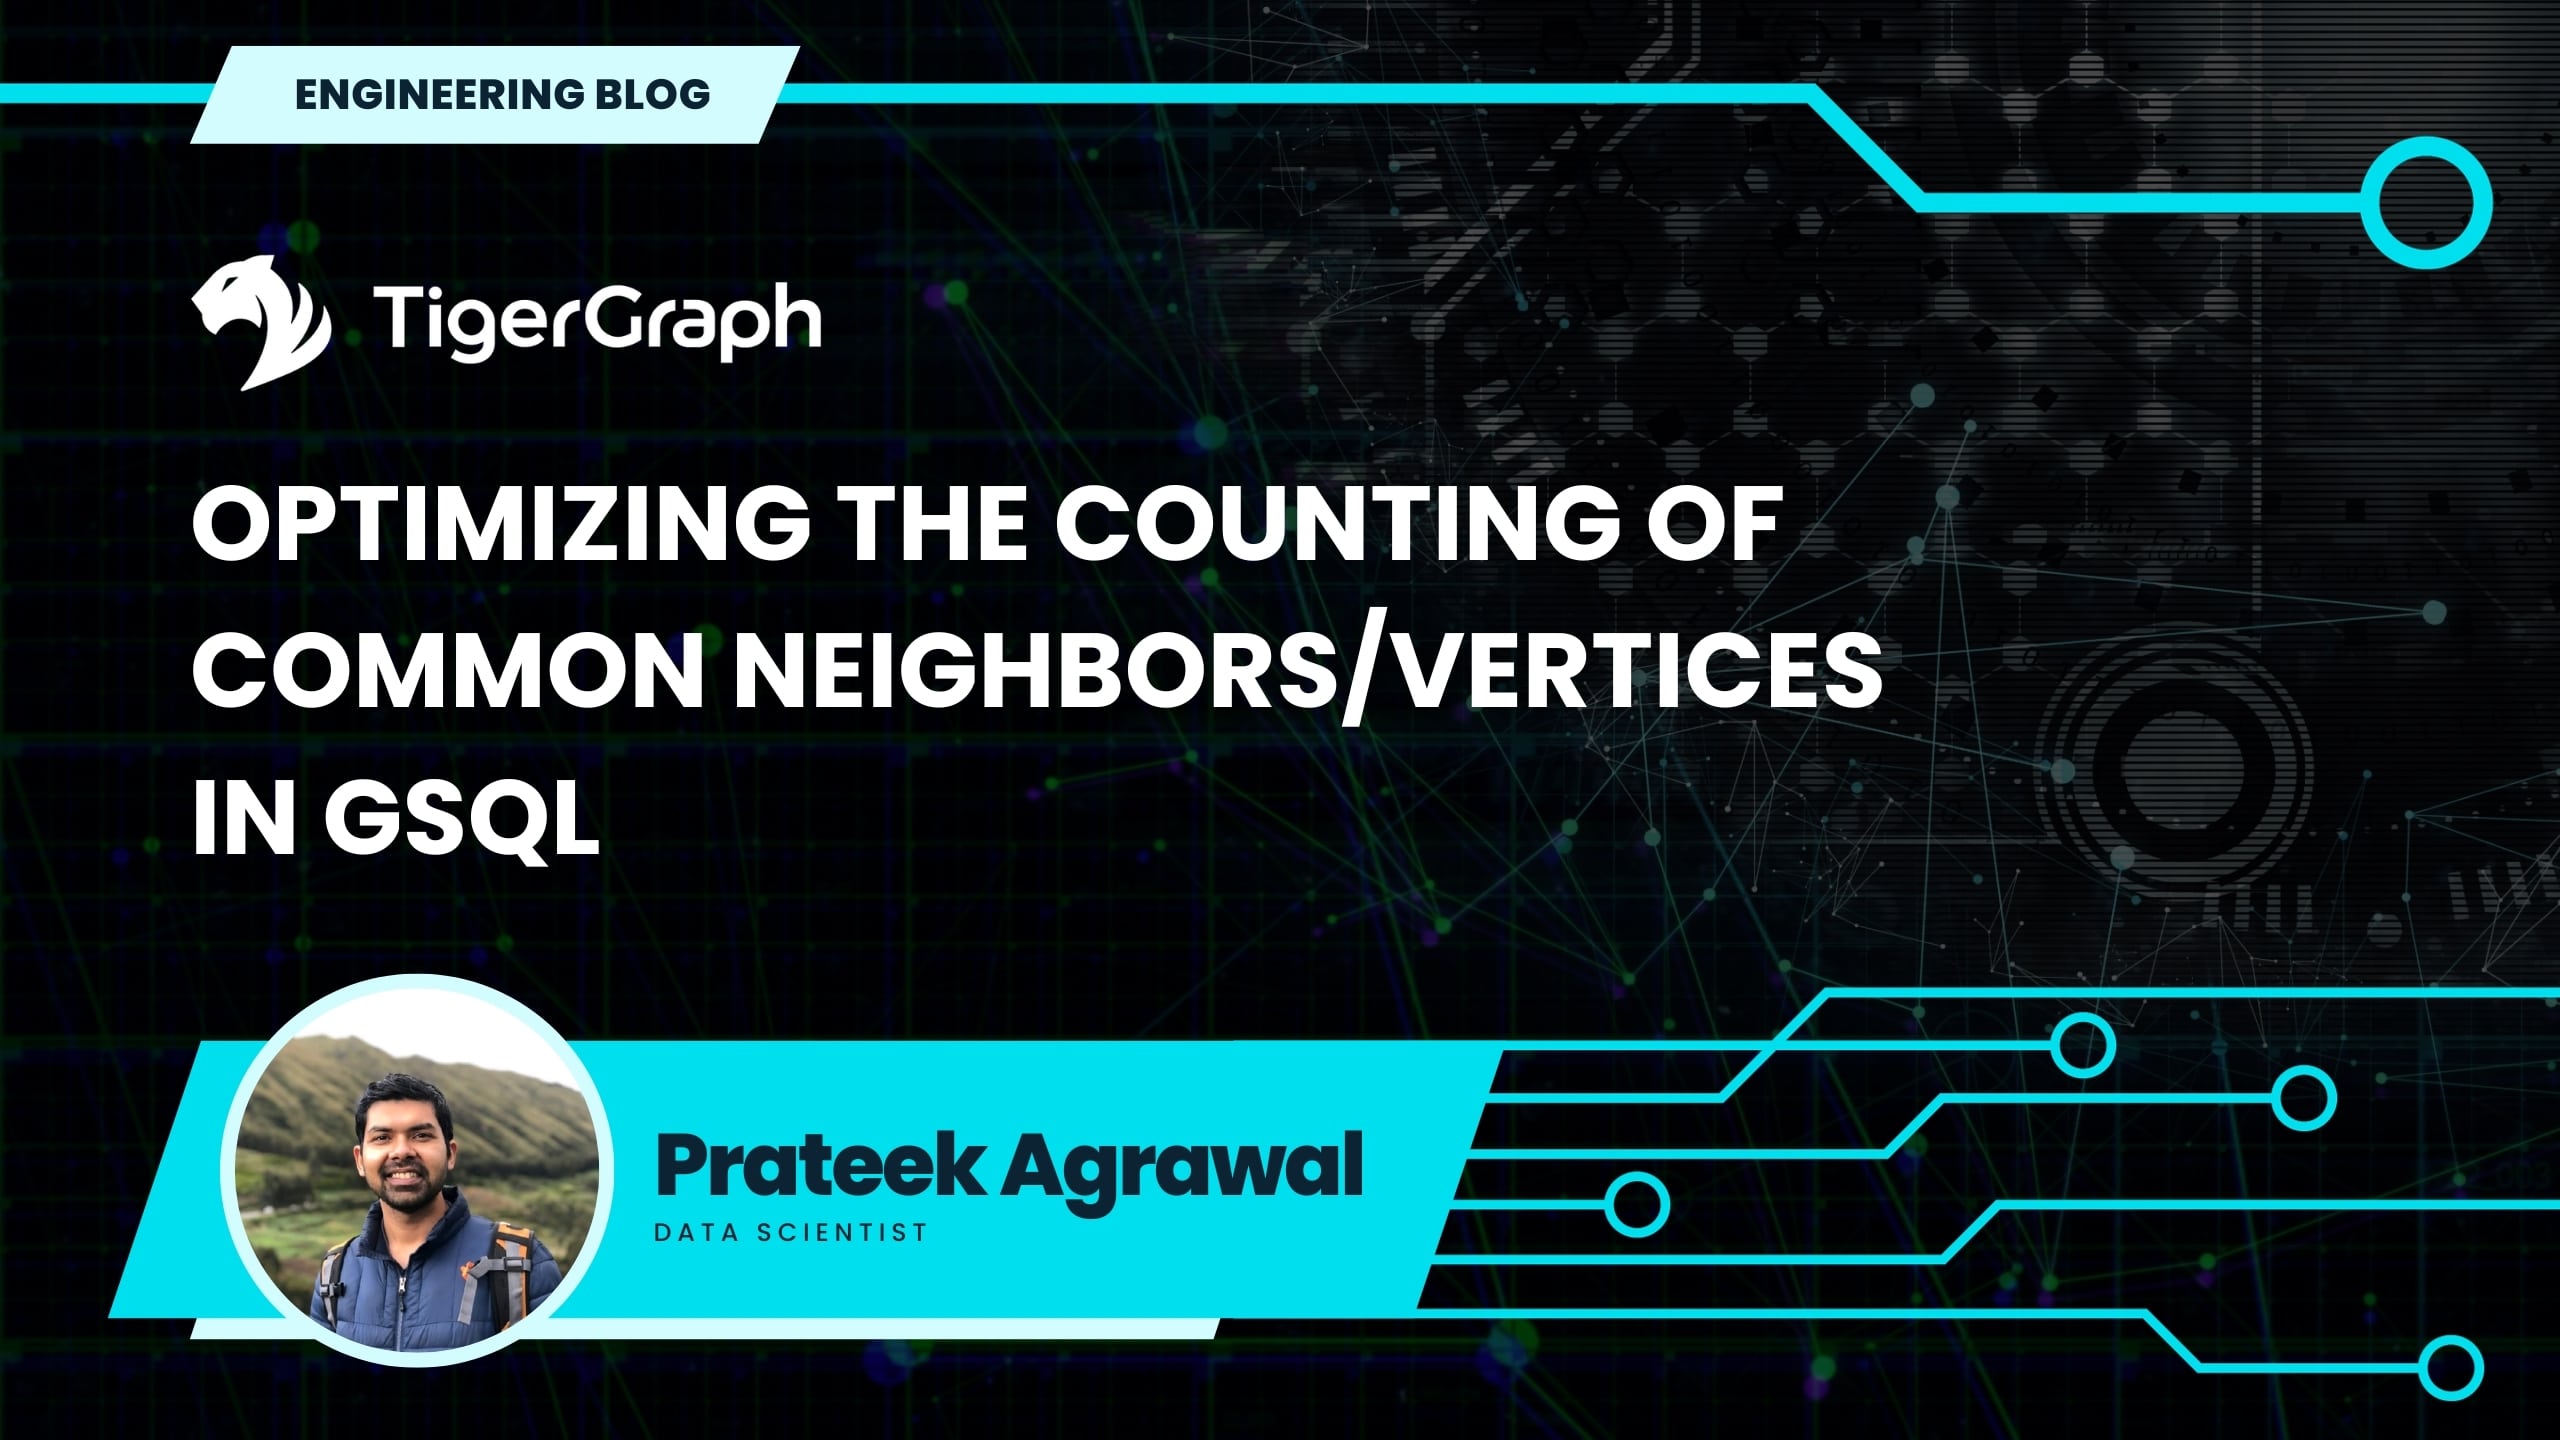 Optimized Counting of Common Neighbors/Vertices in GSQL